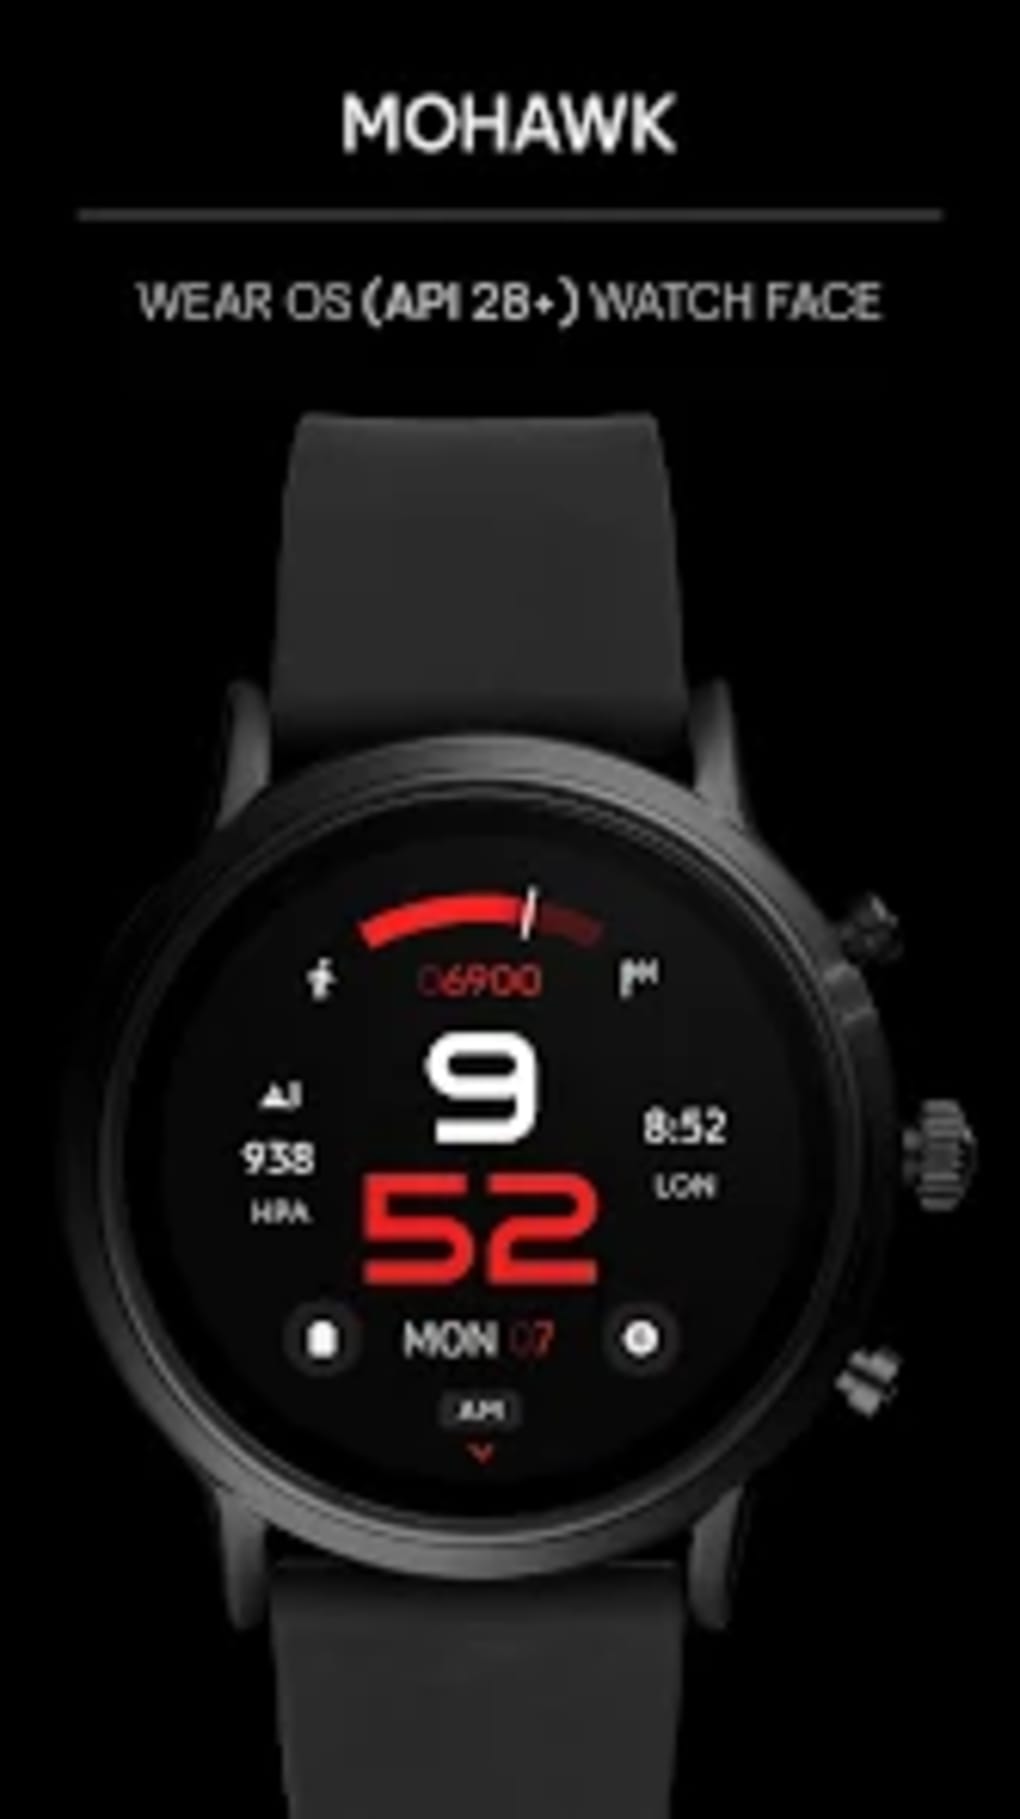 awf-mohawk-watch-face-para-android-download